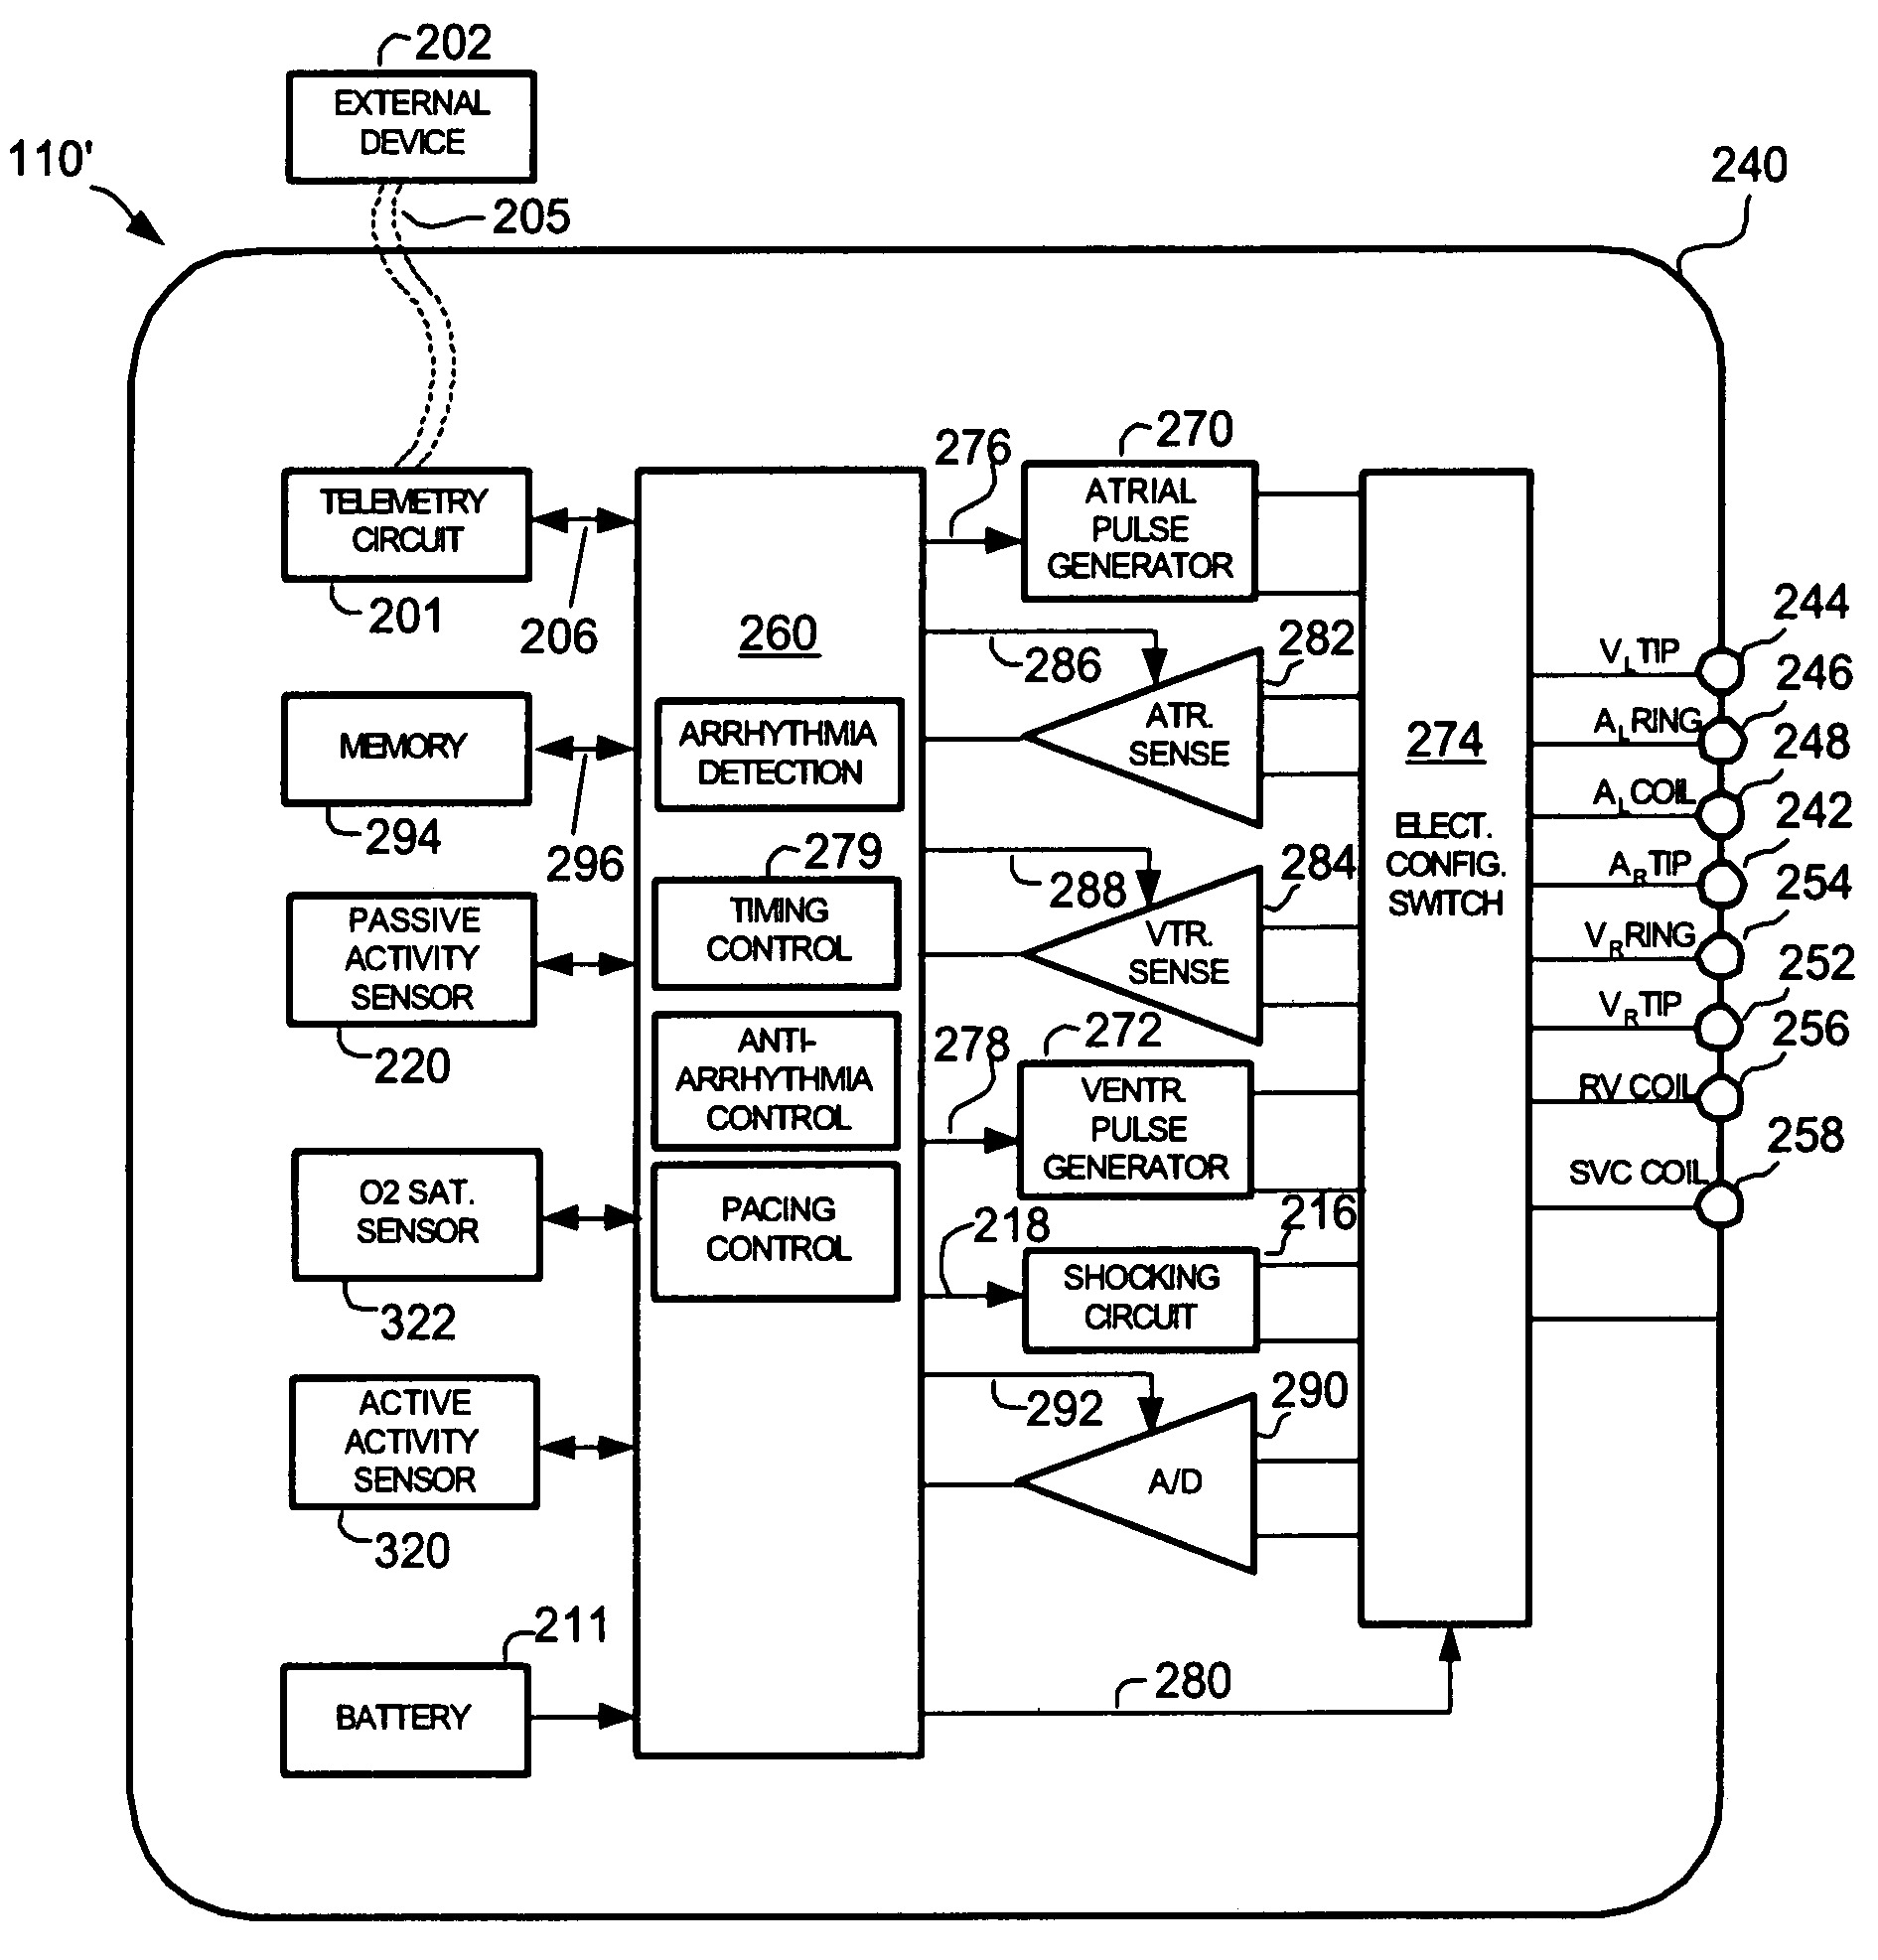 Complimentary activity sensor network for disease monitoring and therapy modulation in an implantable device